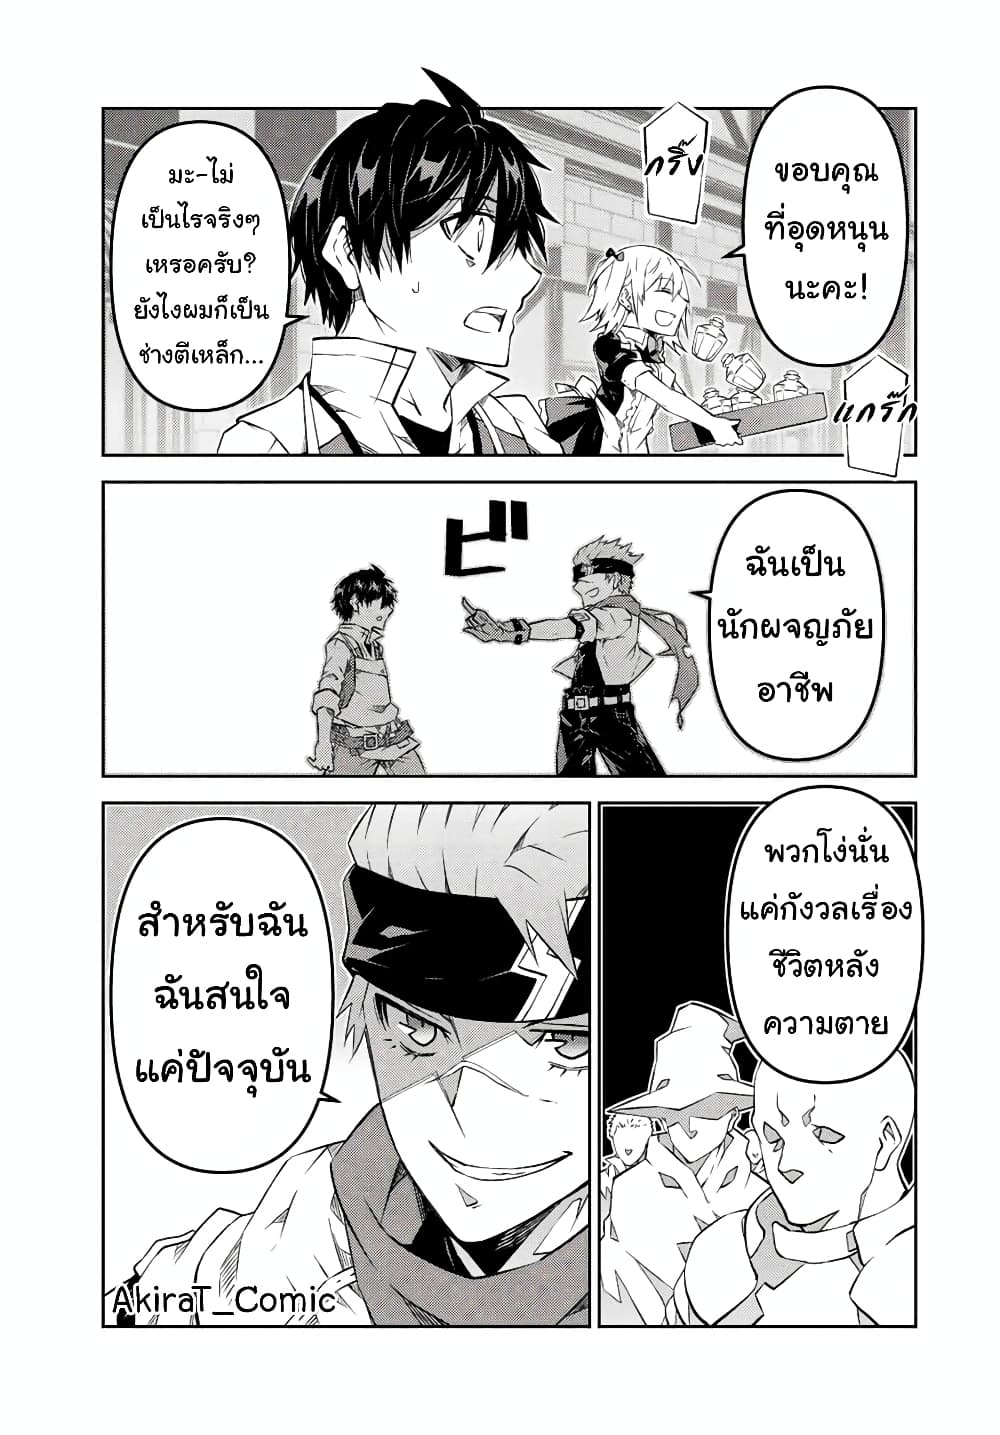 The Weakest Occupation “Blacksmith”, but It’s Actually the Strongest ตอนที่ 101 (6)